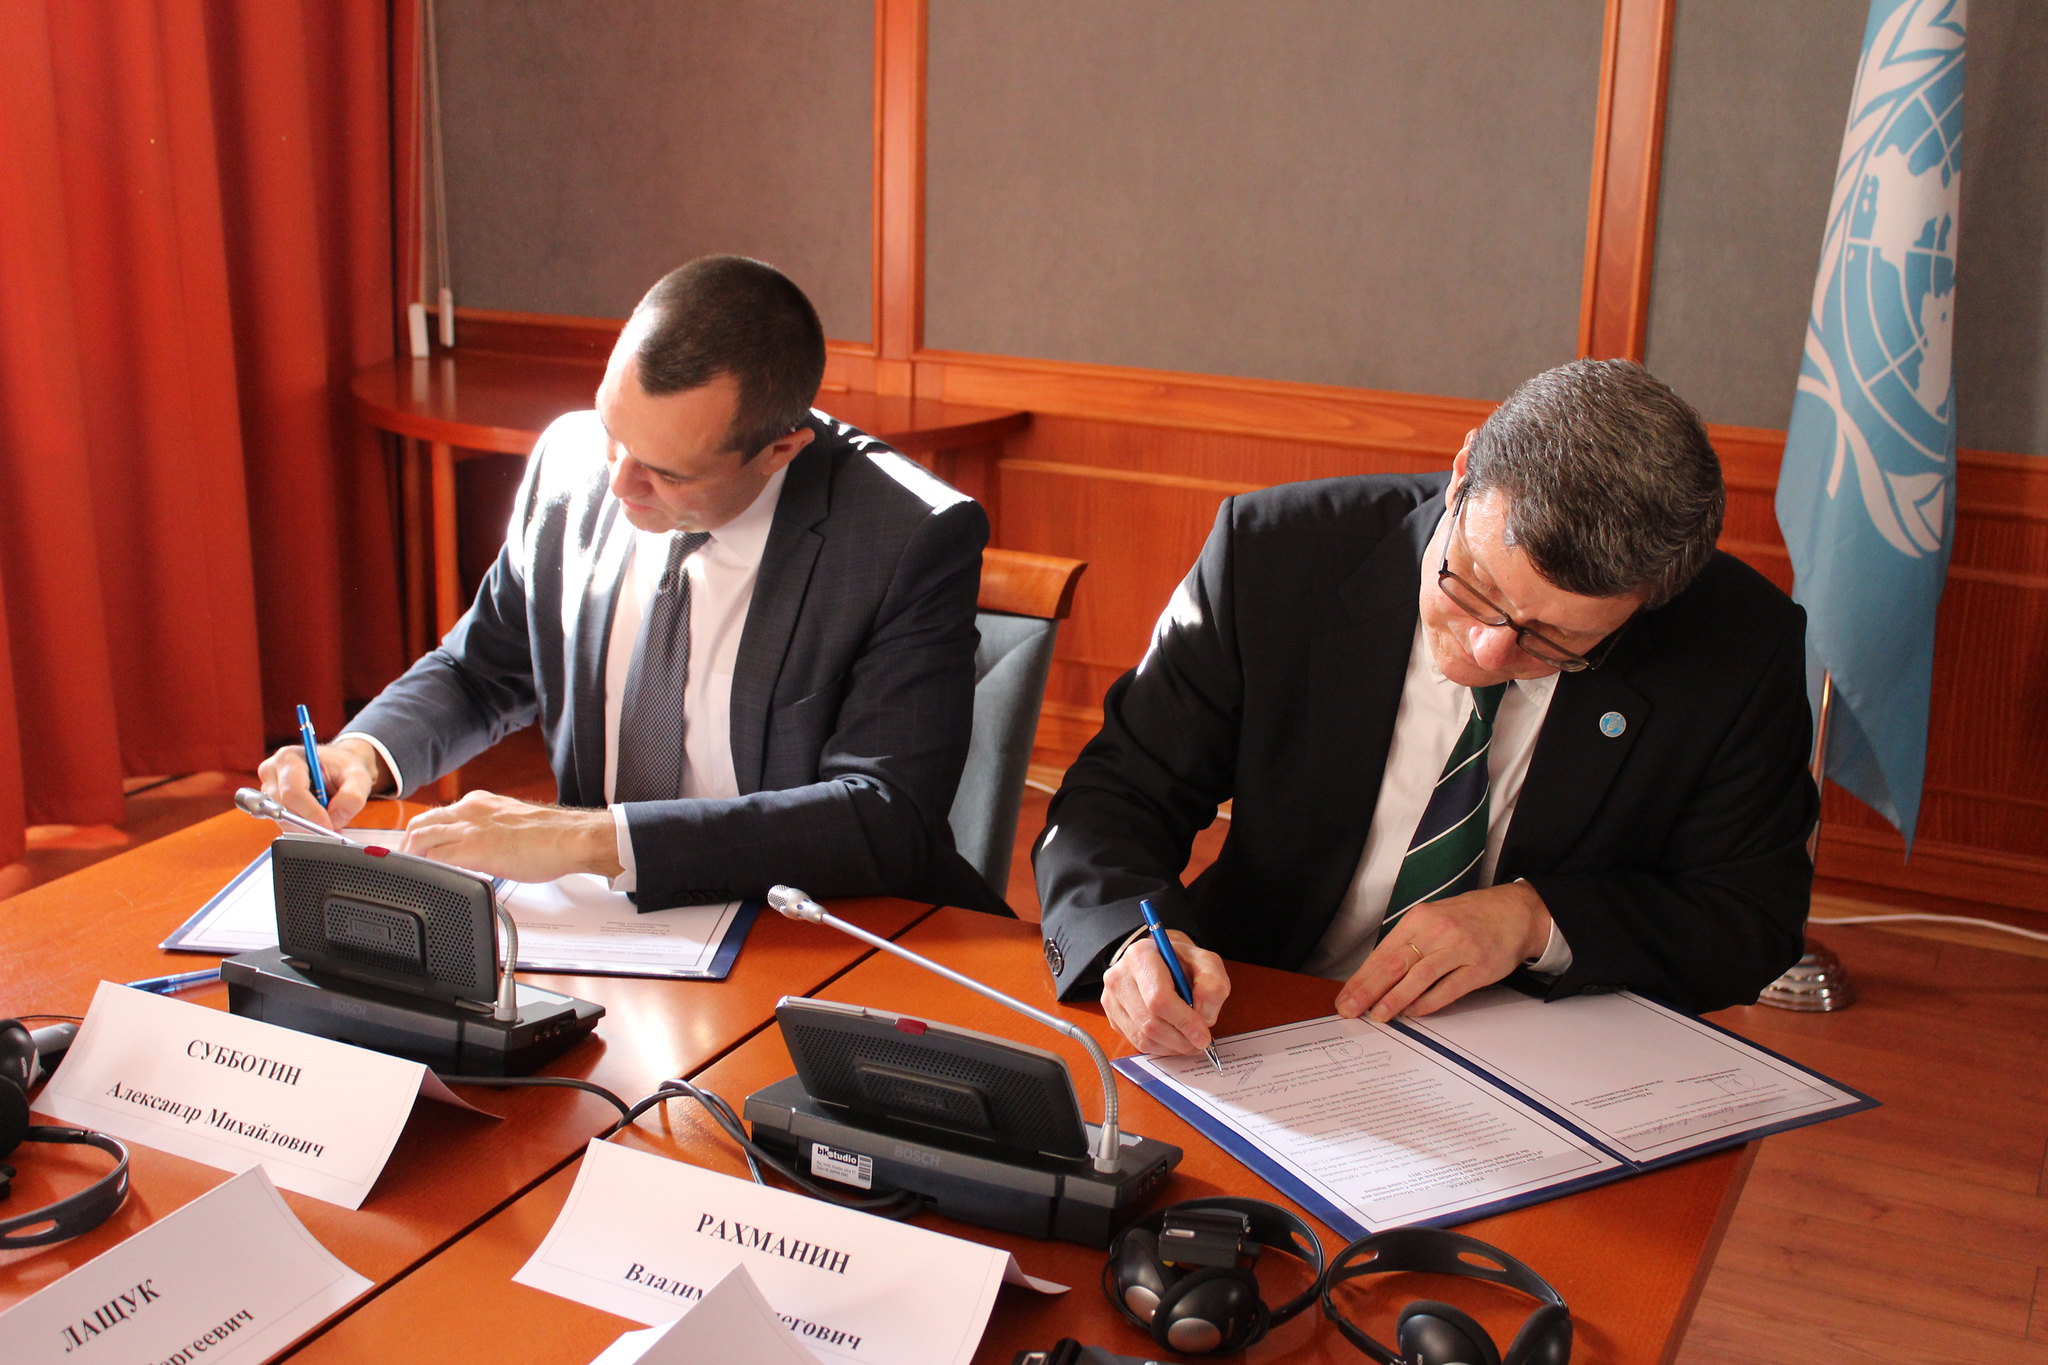 FAO Regional Representative for Europe and Central Asia Vladimir Rakhmanin signed the Protocol of Extension together with the Minister of the EEC responsible for Industry and Agriculture Aliaksandr Subbotin.